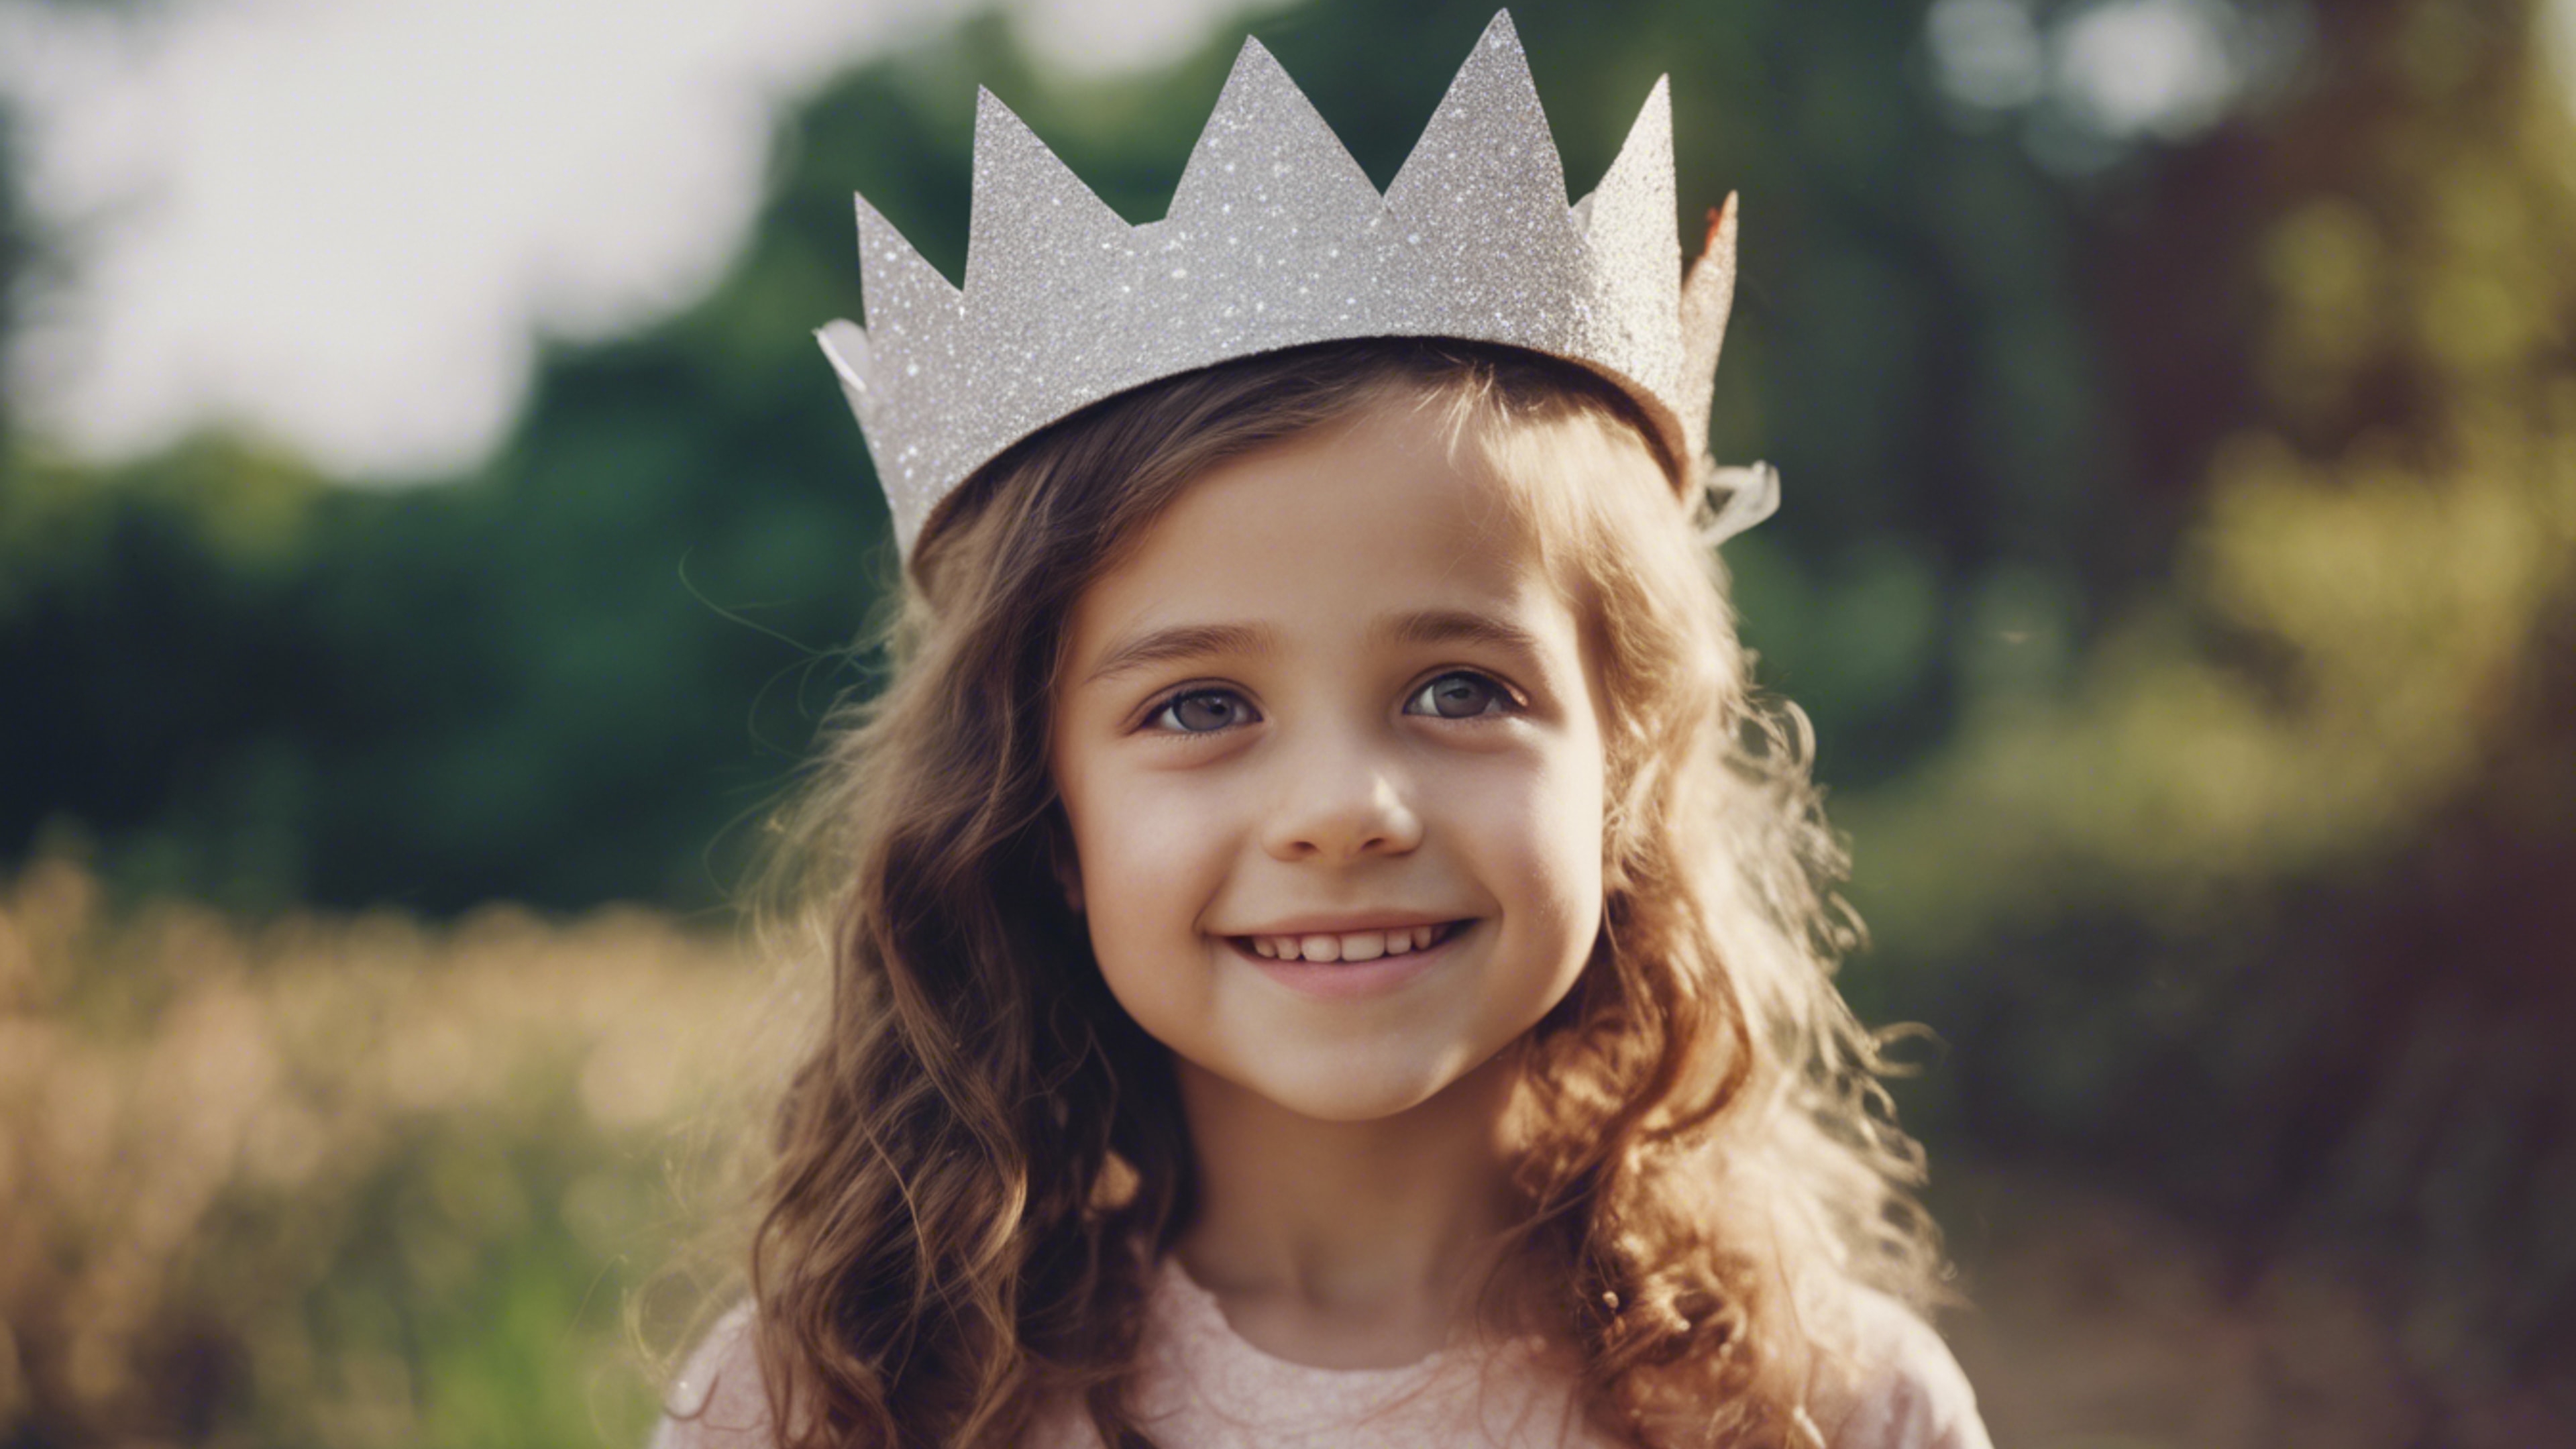 A young girl with sparkling eyes, happily wearing a homemade paper crown. Тапет[aa9d8265bf9b488b9728]